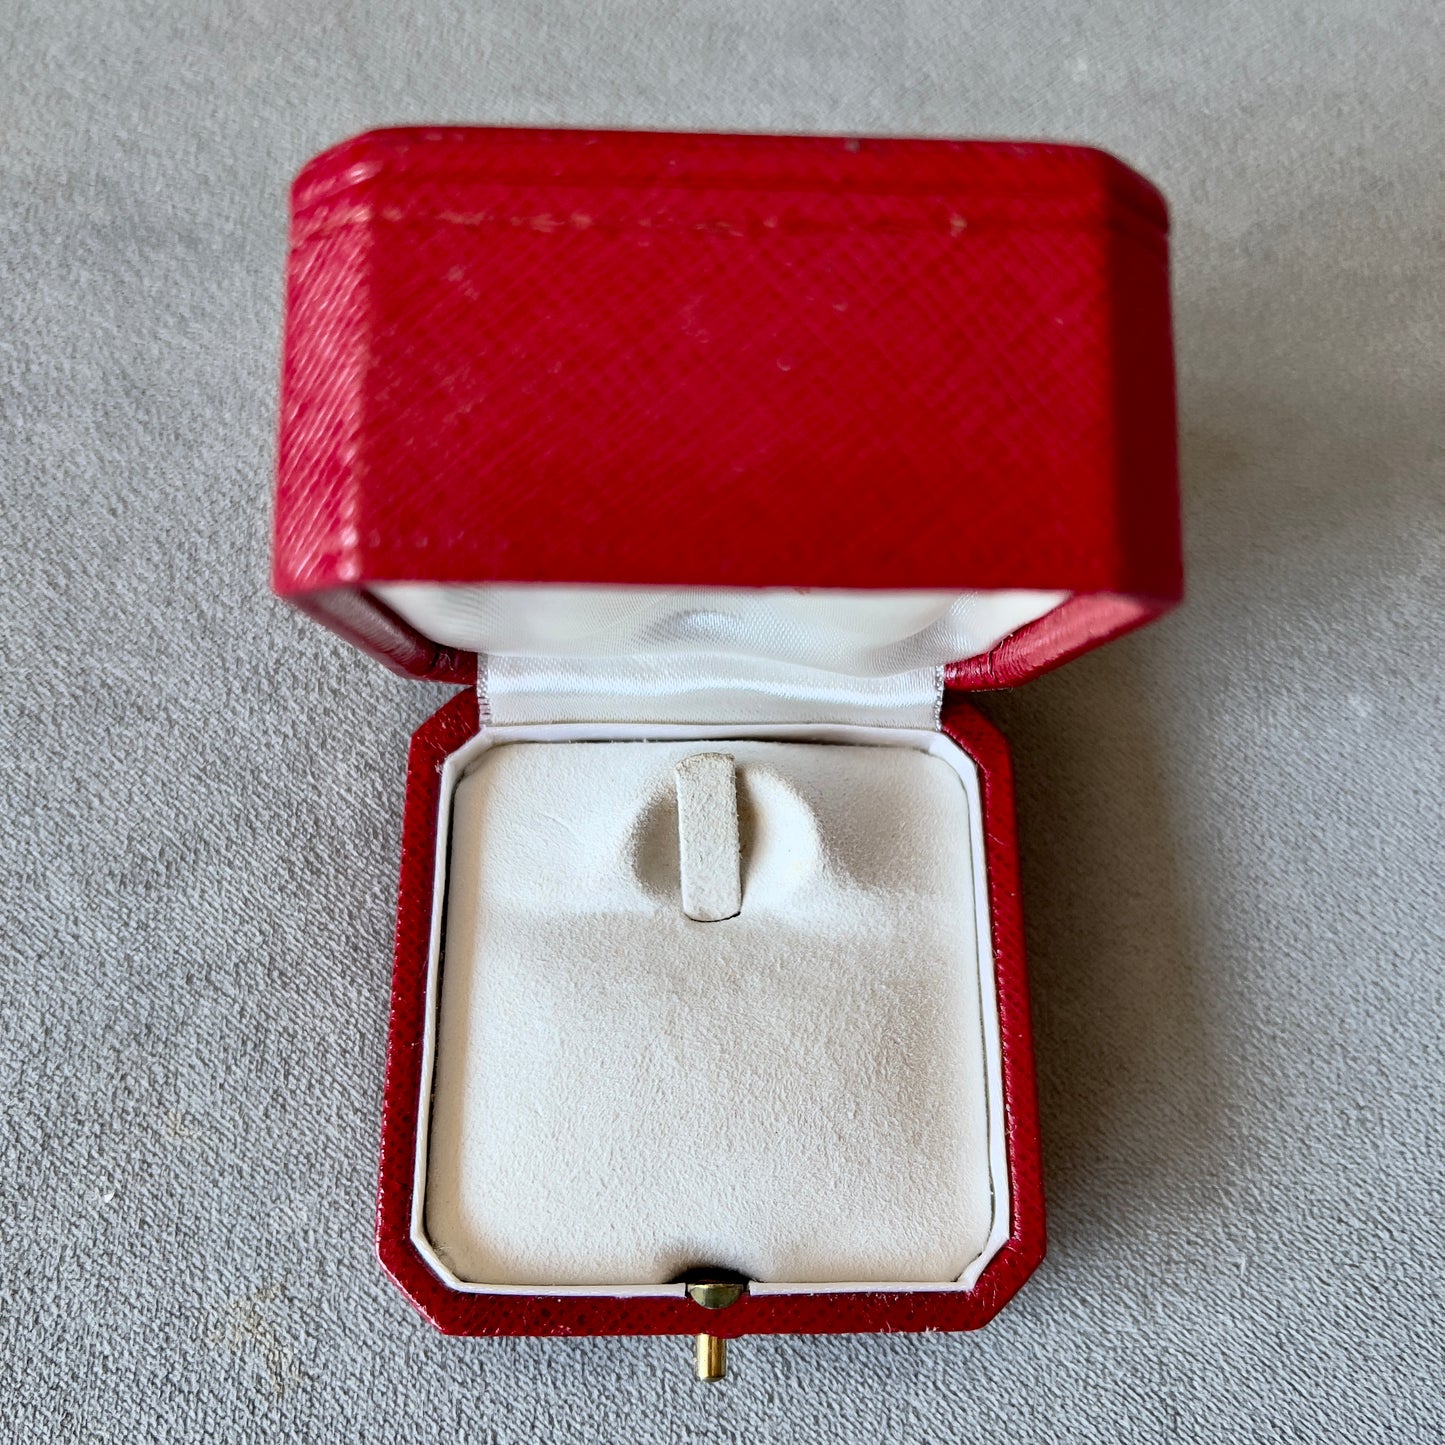 CARTIER Ring Pendant Box 2.50x2.50x1.85 inches